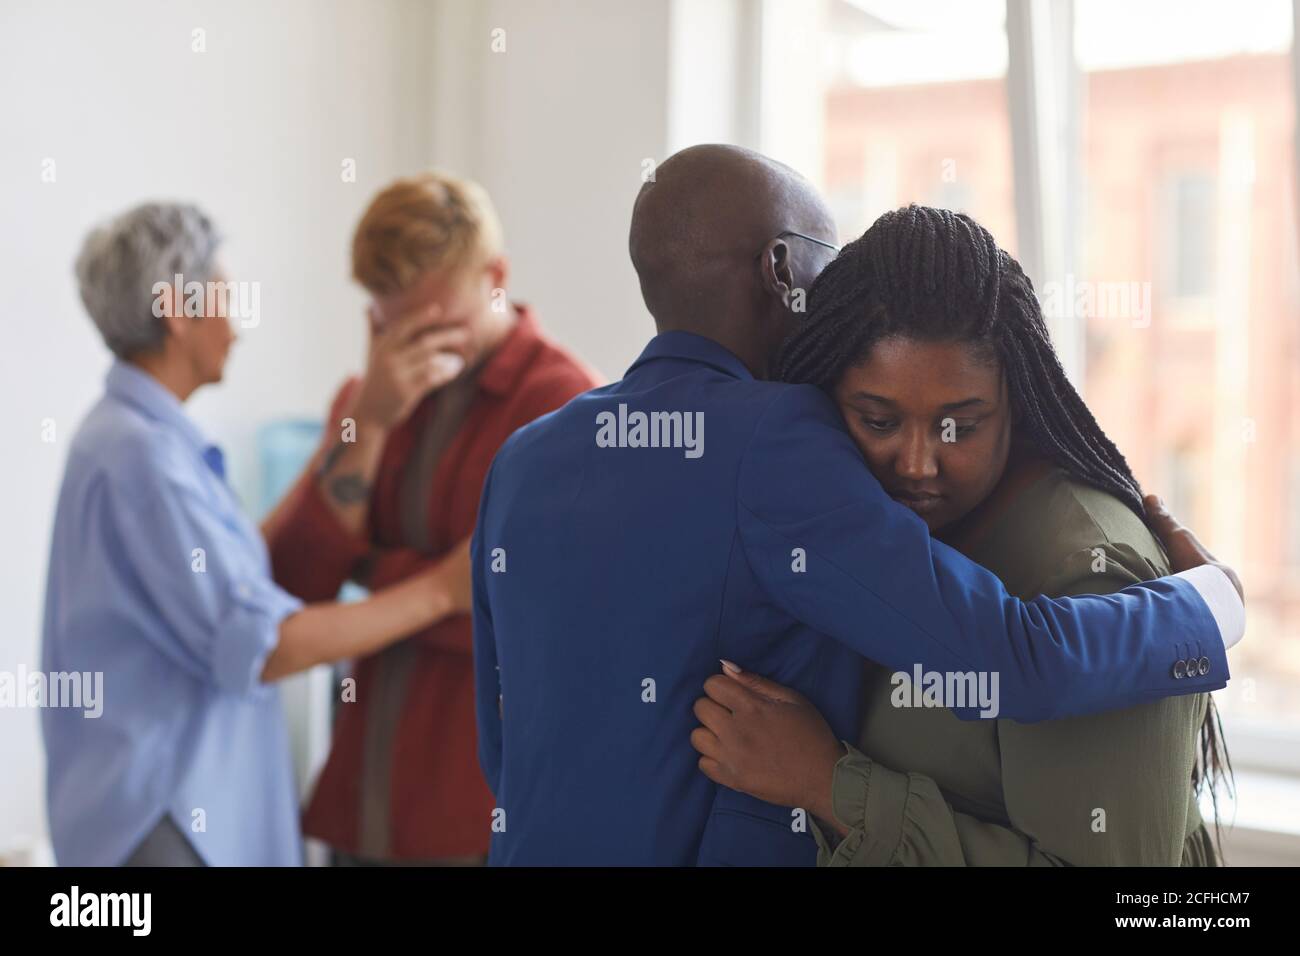 Waist up view at two African-American people embracing during support group meeting, helping each other with stress, anxiety and grief, copy space Stock Photo